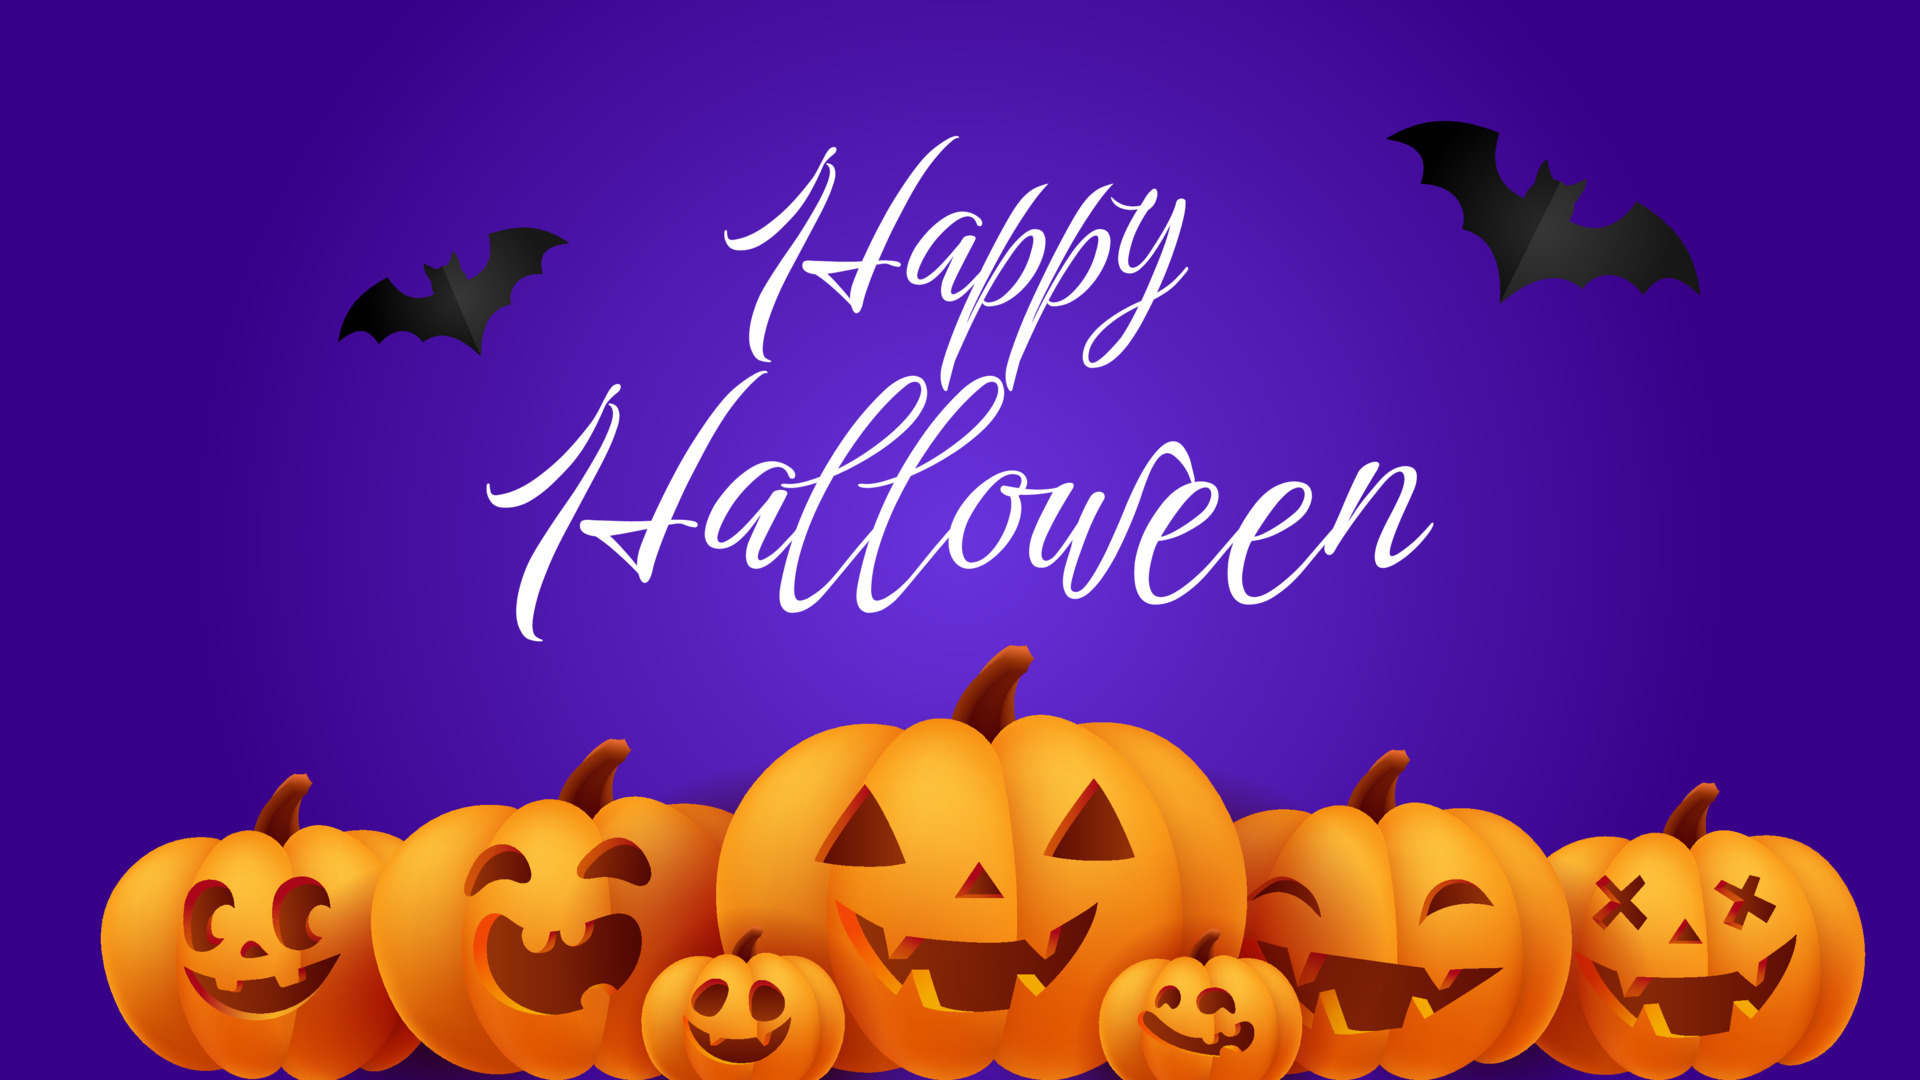 Happy Halloween purple banner, or party invitation background with jack o lantern carving face cute pumpkins and bats. 3D vector illustration realistic pumpkin wallpaper